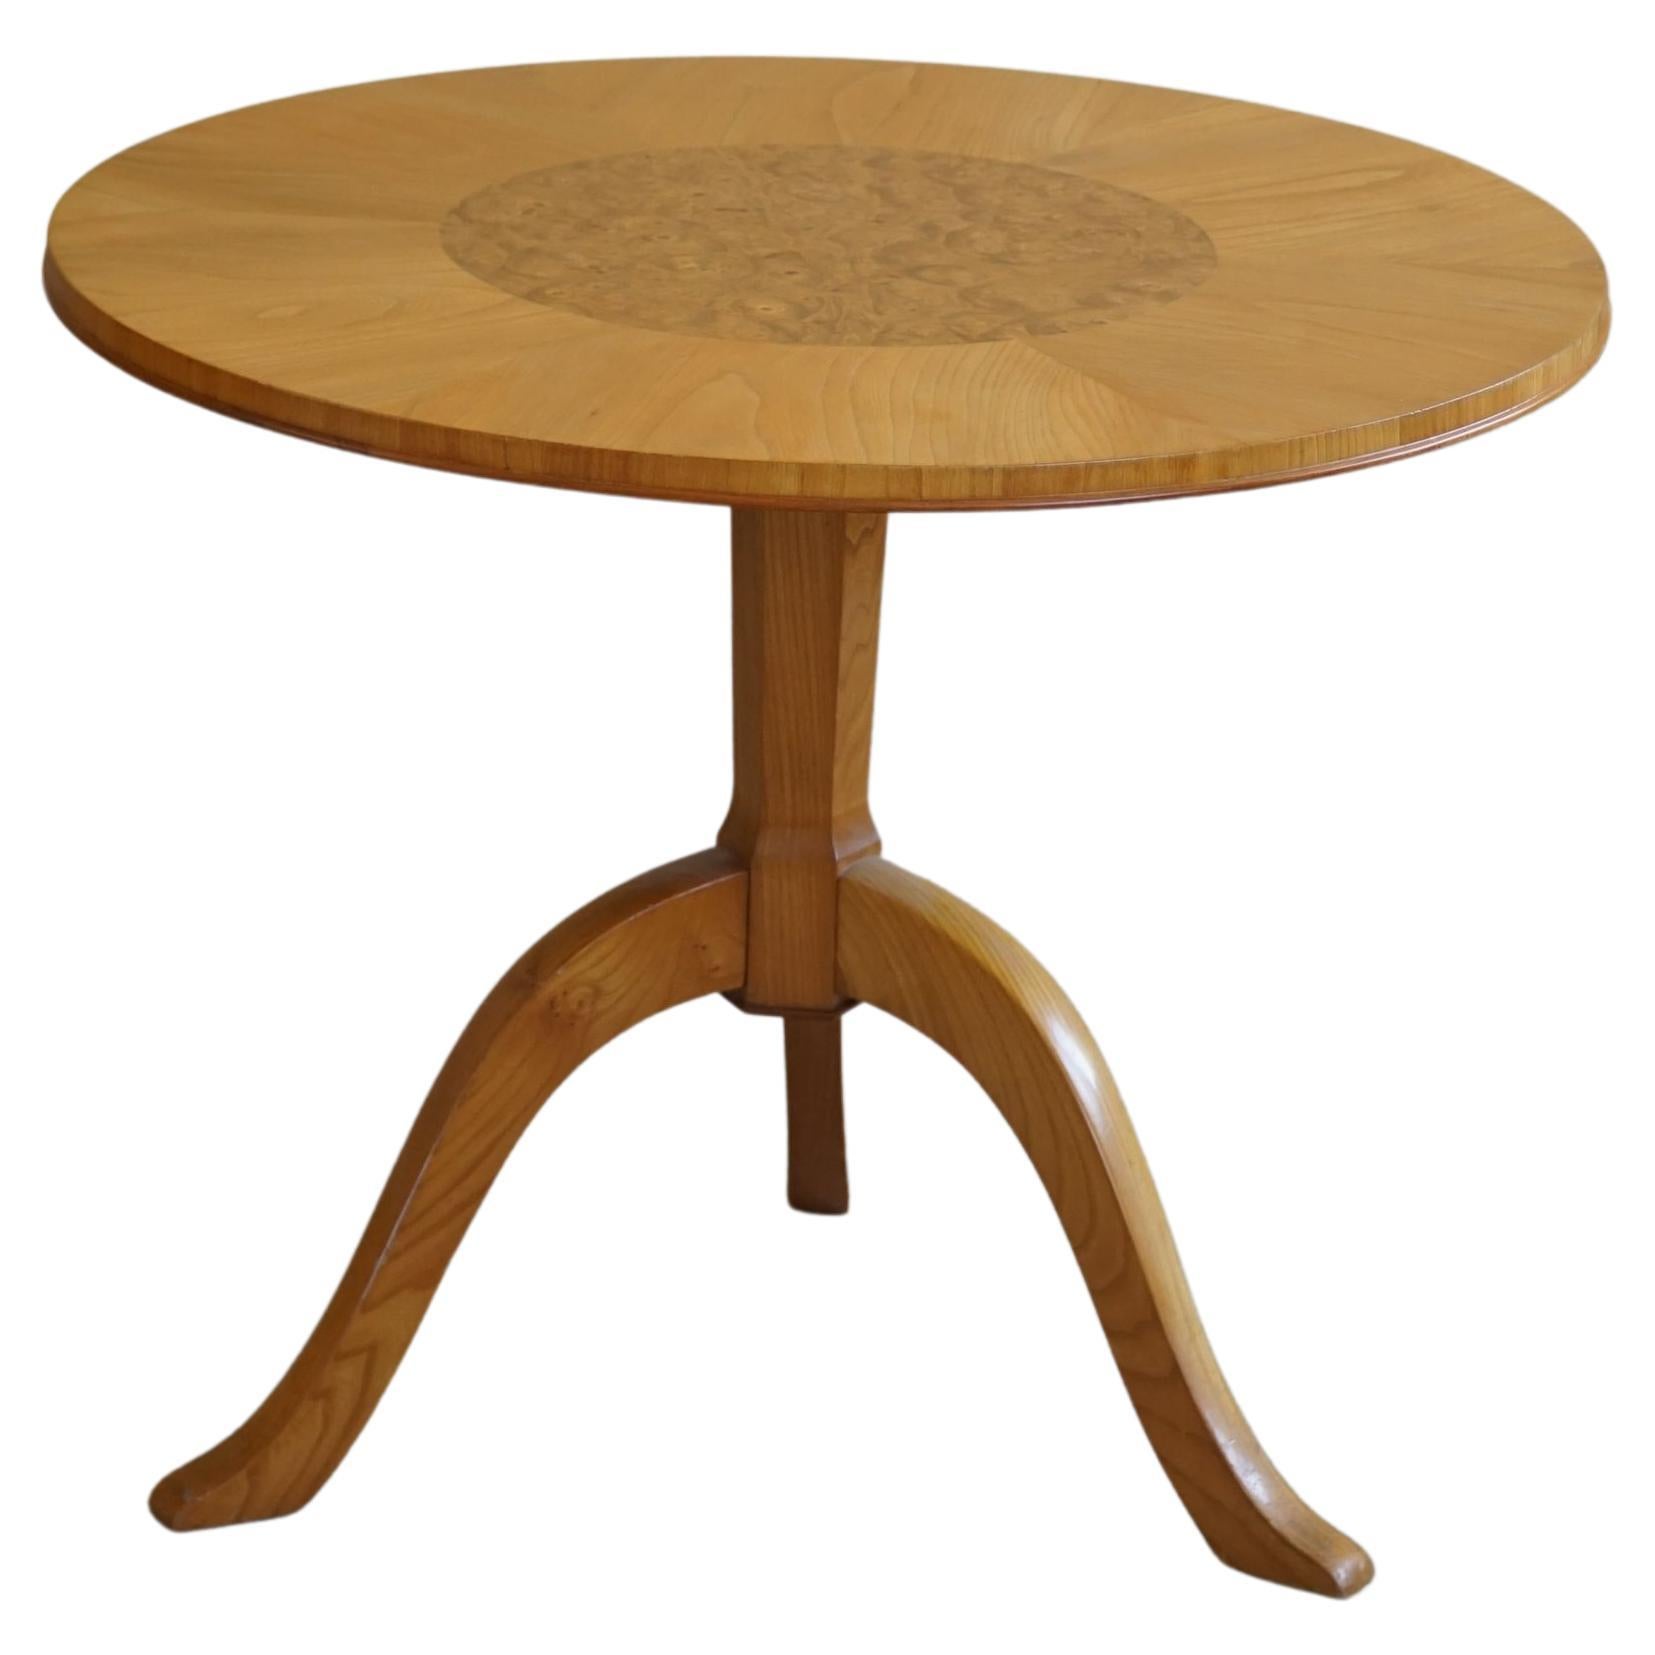 Swedish Round Art Deco Side Table / Coffee Table in Elm & Birch, Made in 1940s For Sale